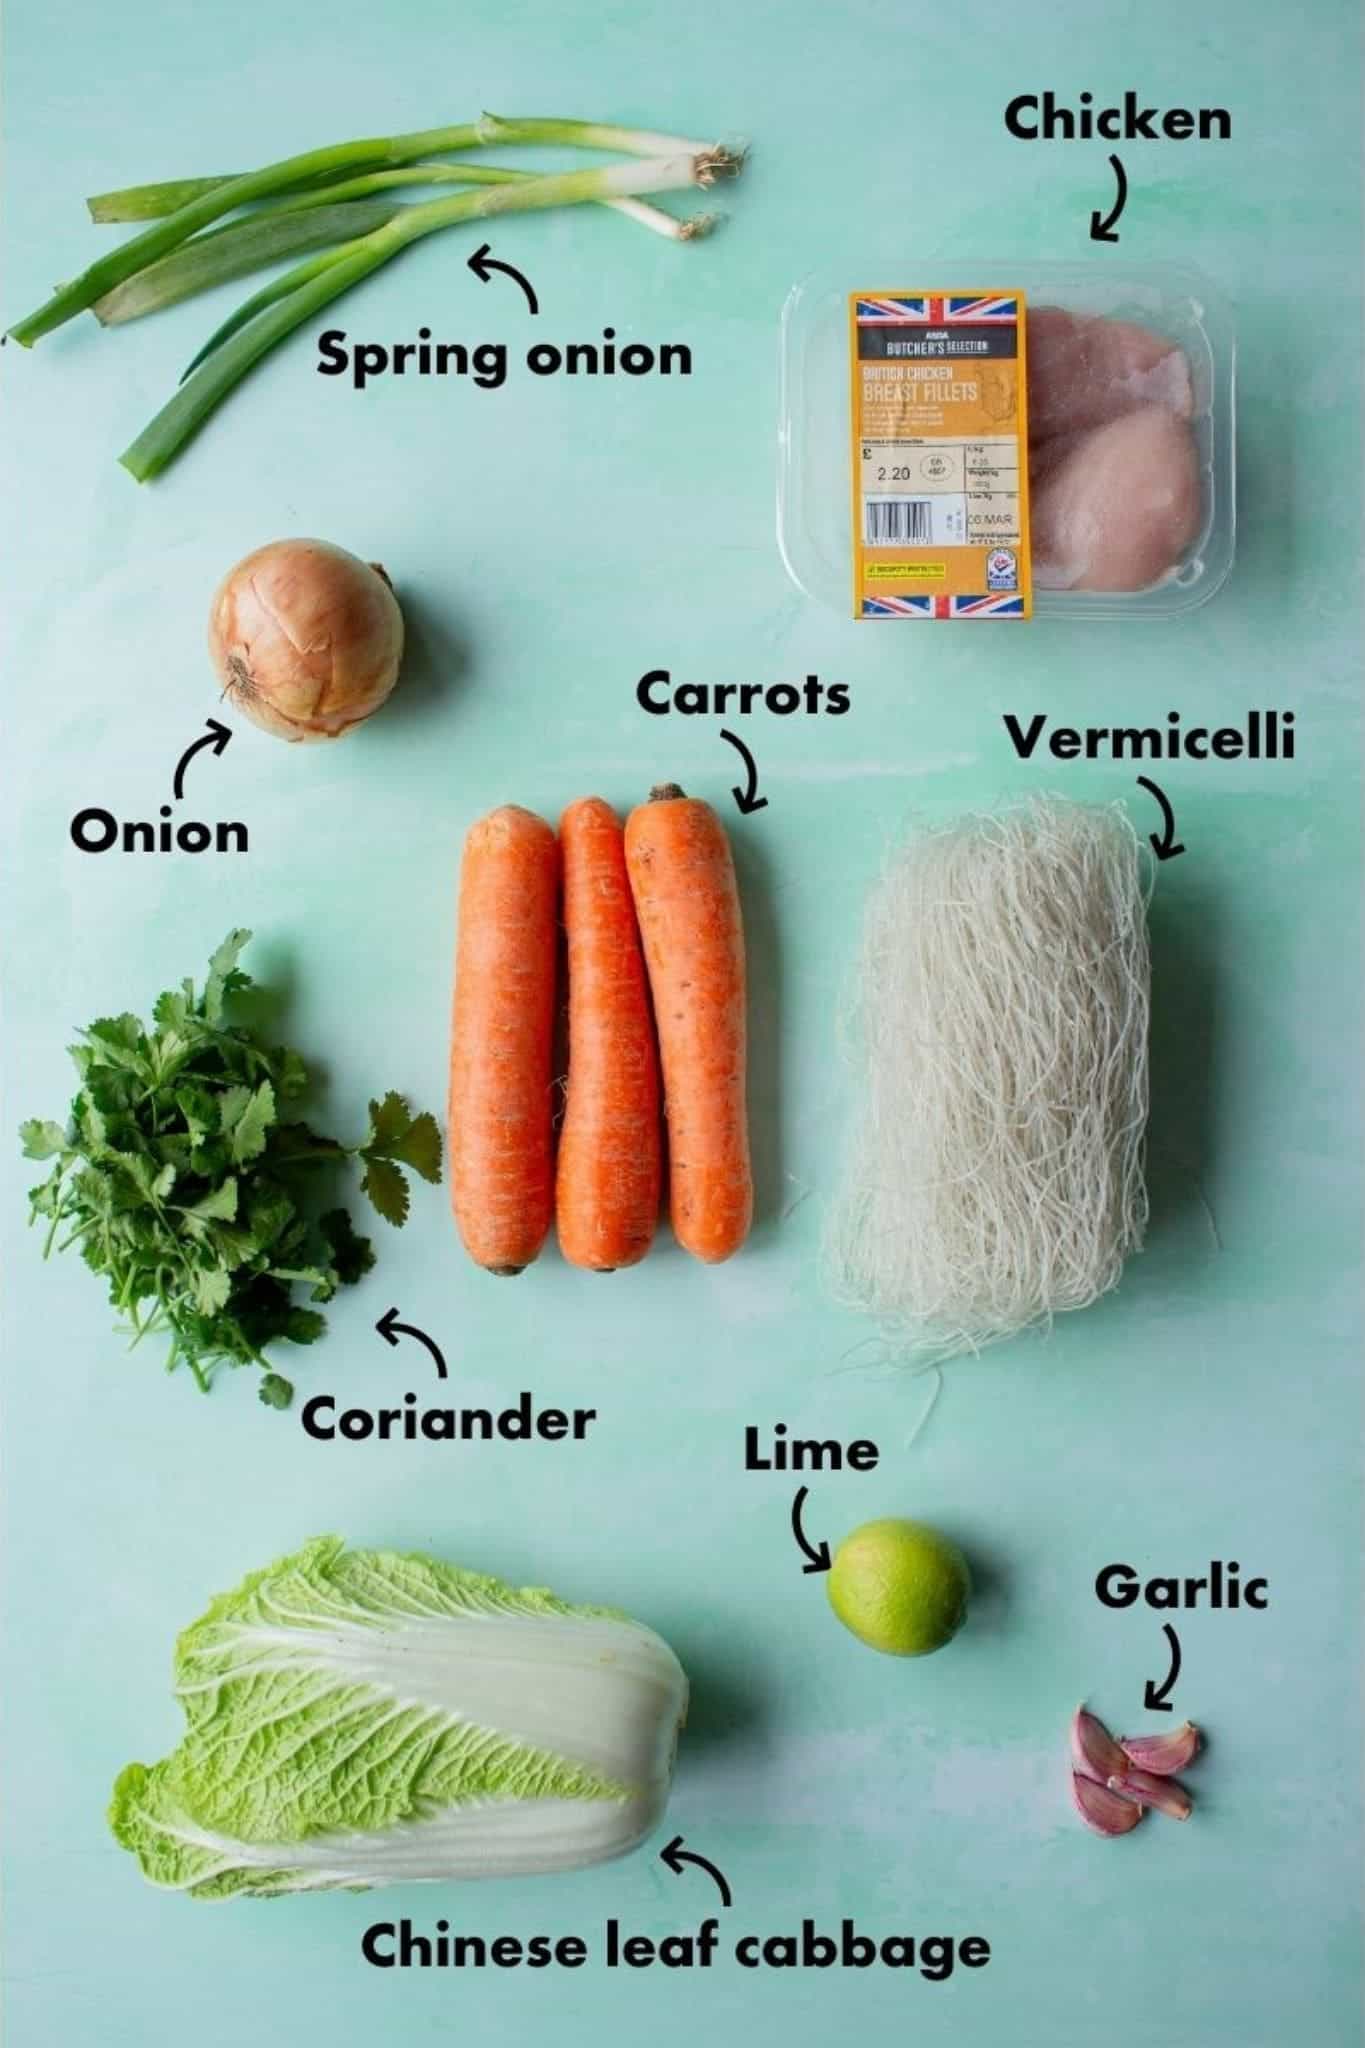 Ingredients to make chicken Vermicelli laid out on a pale blue background and labelled.